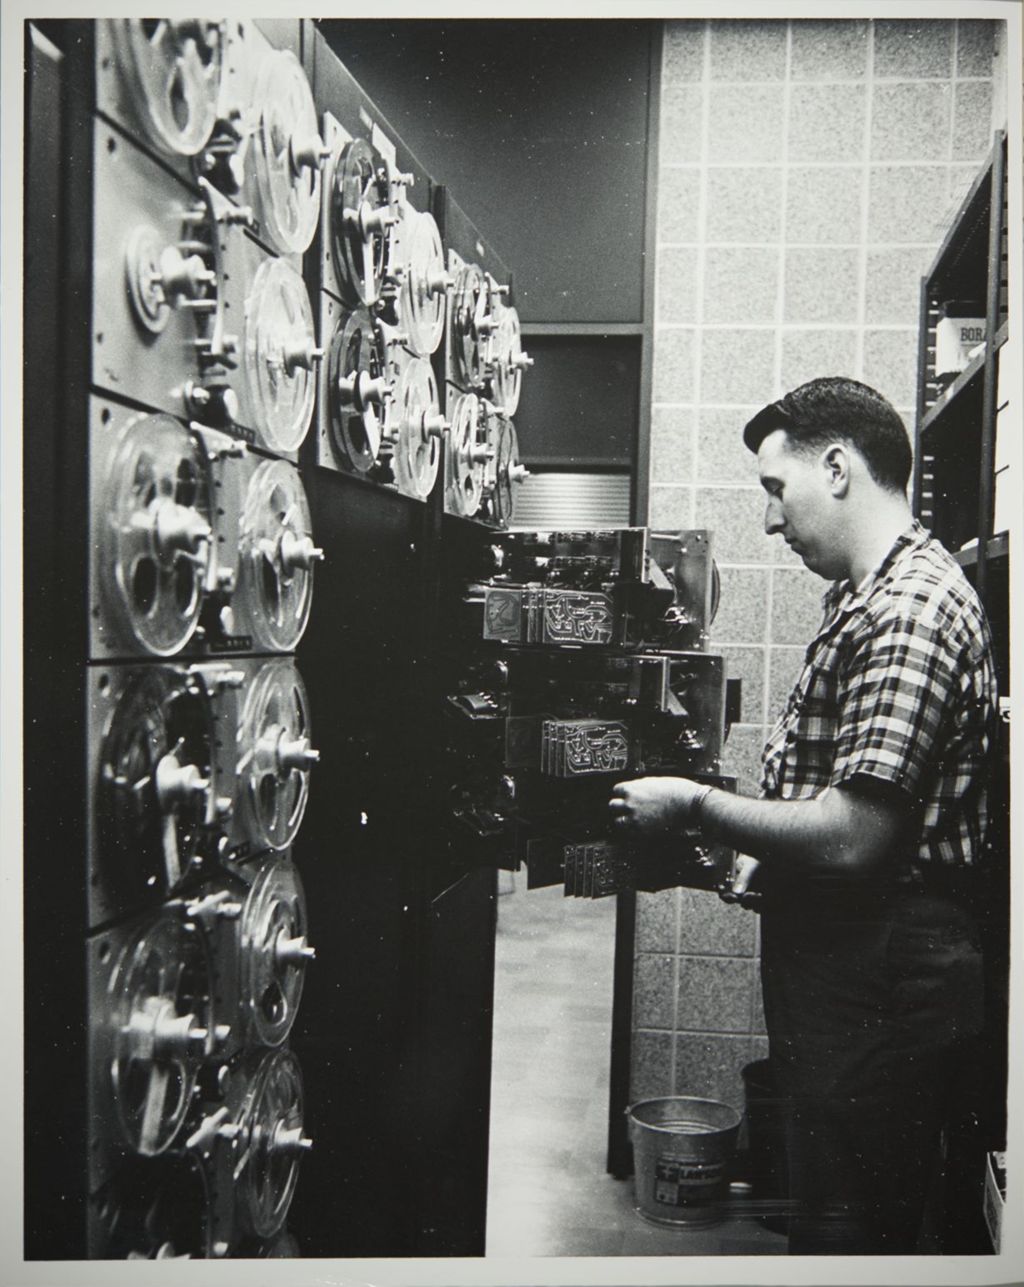 Miniature of Person with reel tapes, possibly for a computer